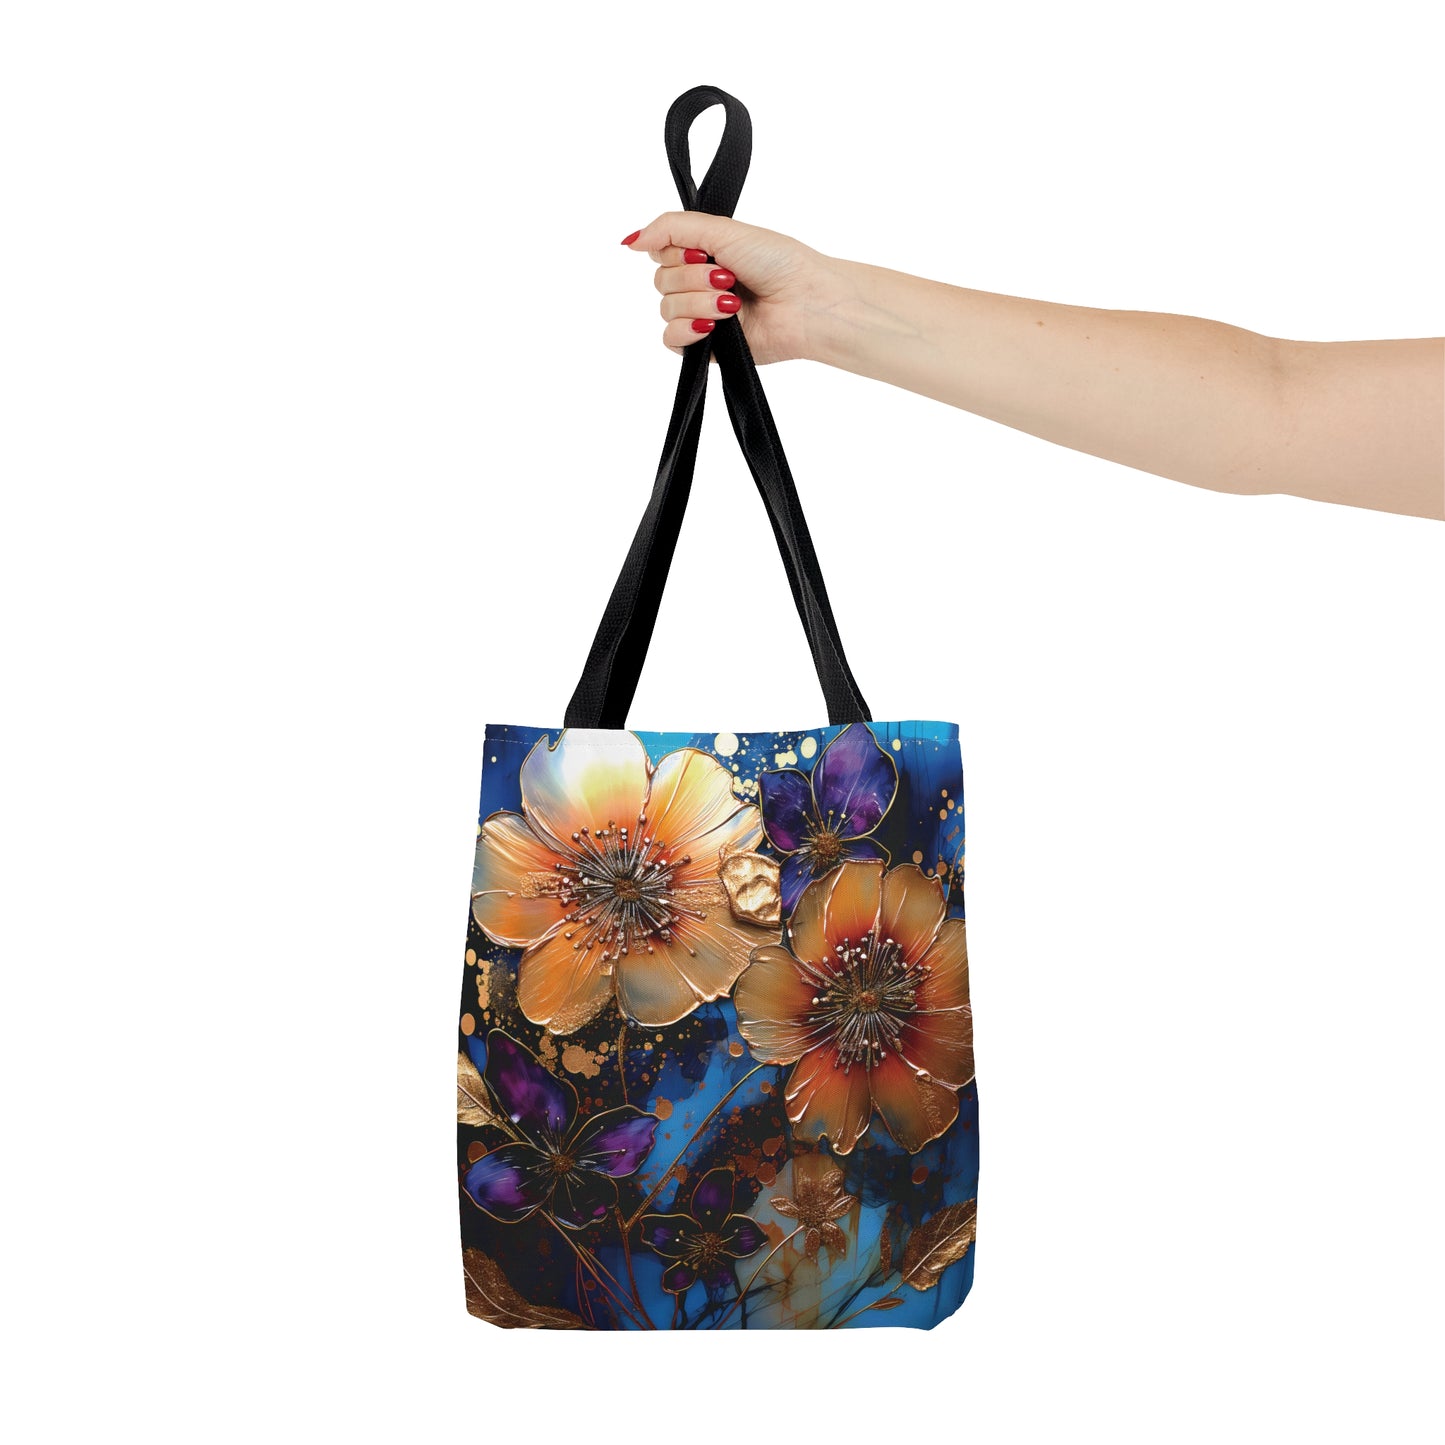 Astral Infusion Tote Bag